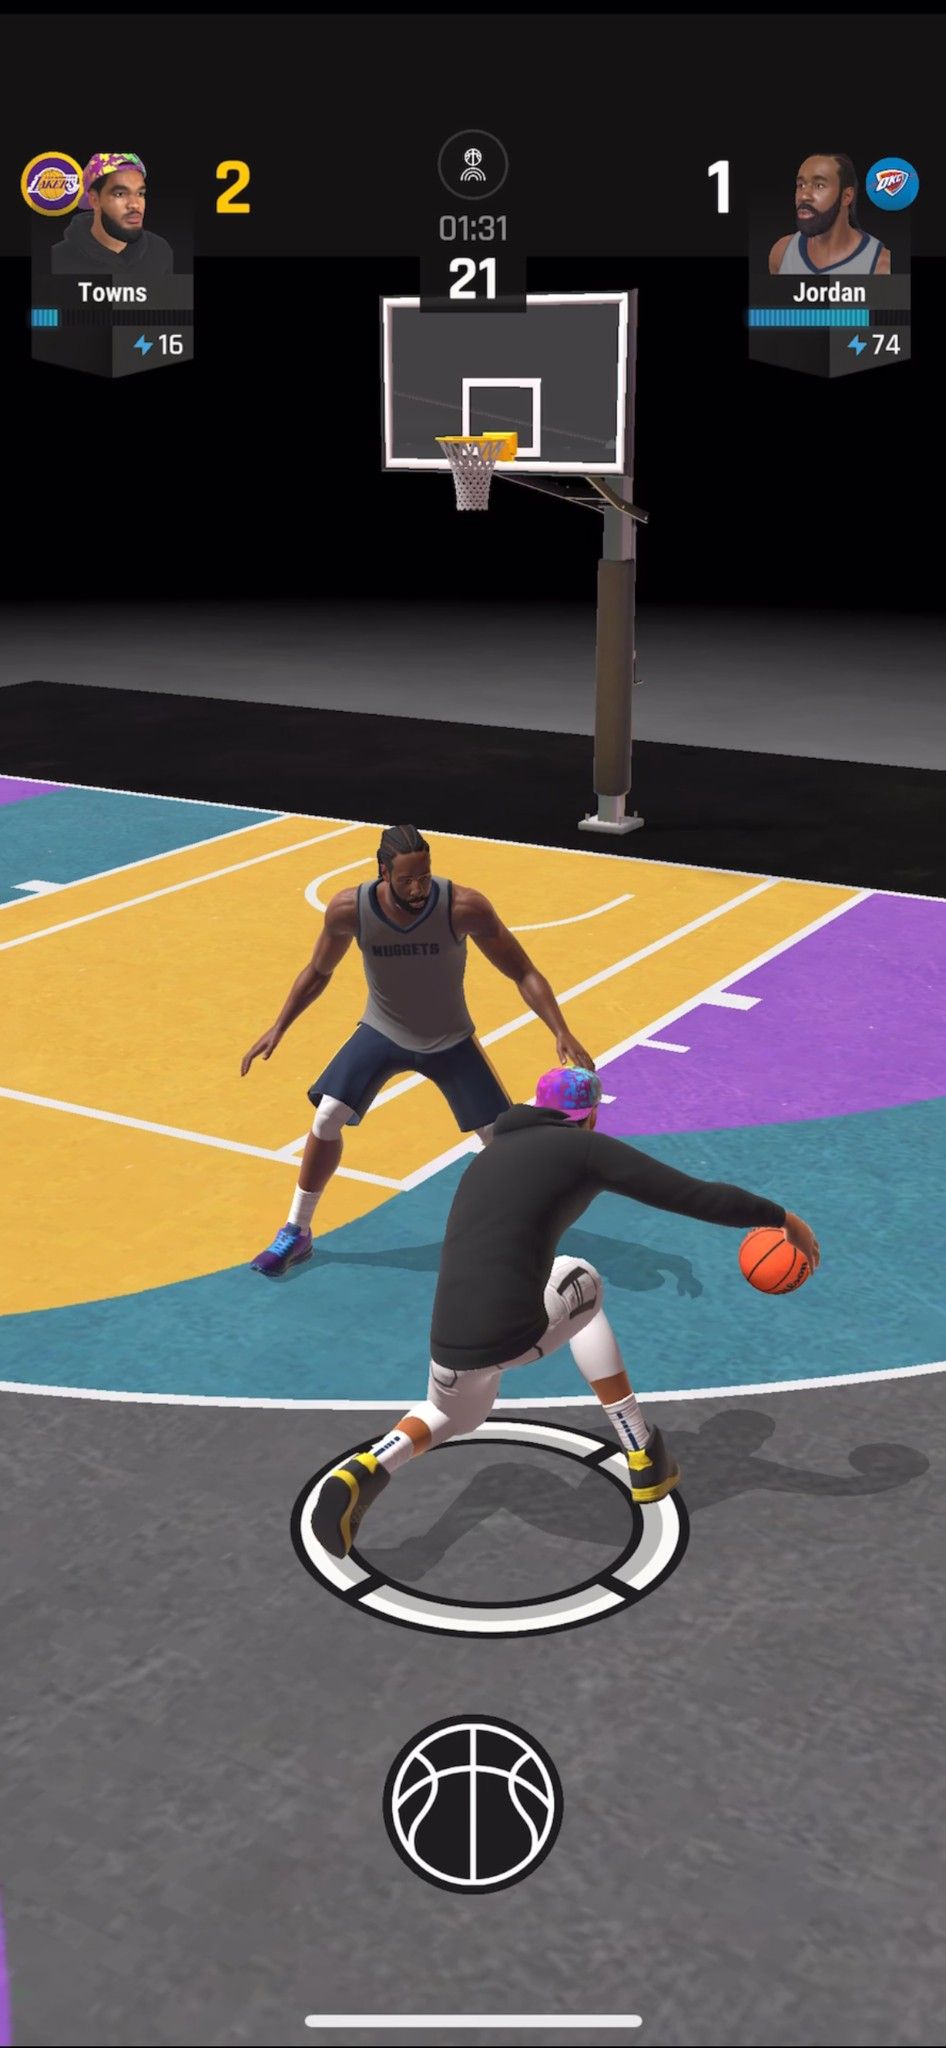 NBA All World gameplay featuring two players on a court, one of whom dribbles the ball.